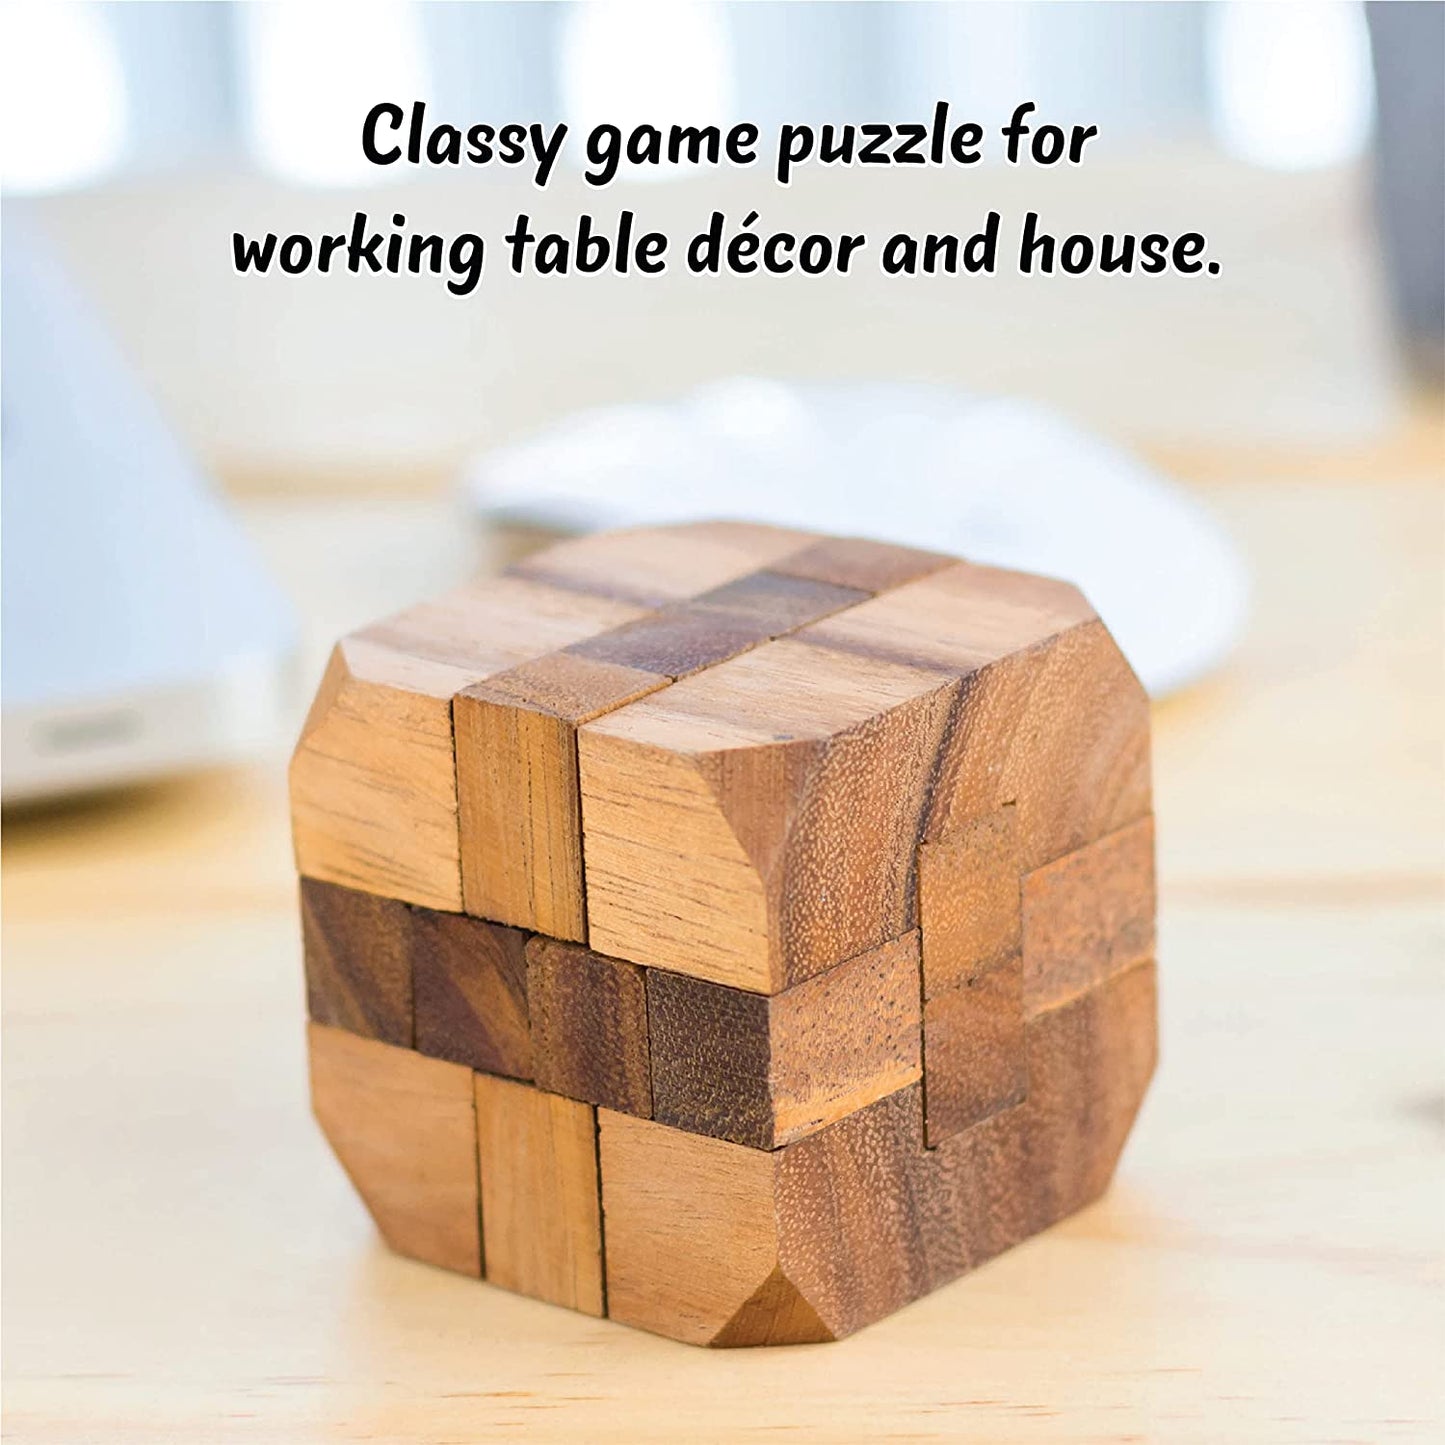 Games Gifts and Brain Teaser Puzzles for Adults Classic Games of Diamond Cube Puzzle for Kids Puzzle Games to Challenge Mind Puzzles for Adults for Fun and Educational Game Kids Wooden Puzzles